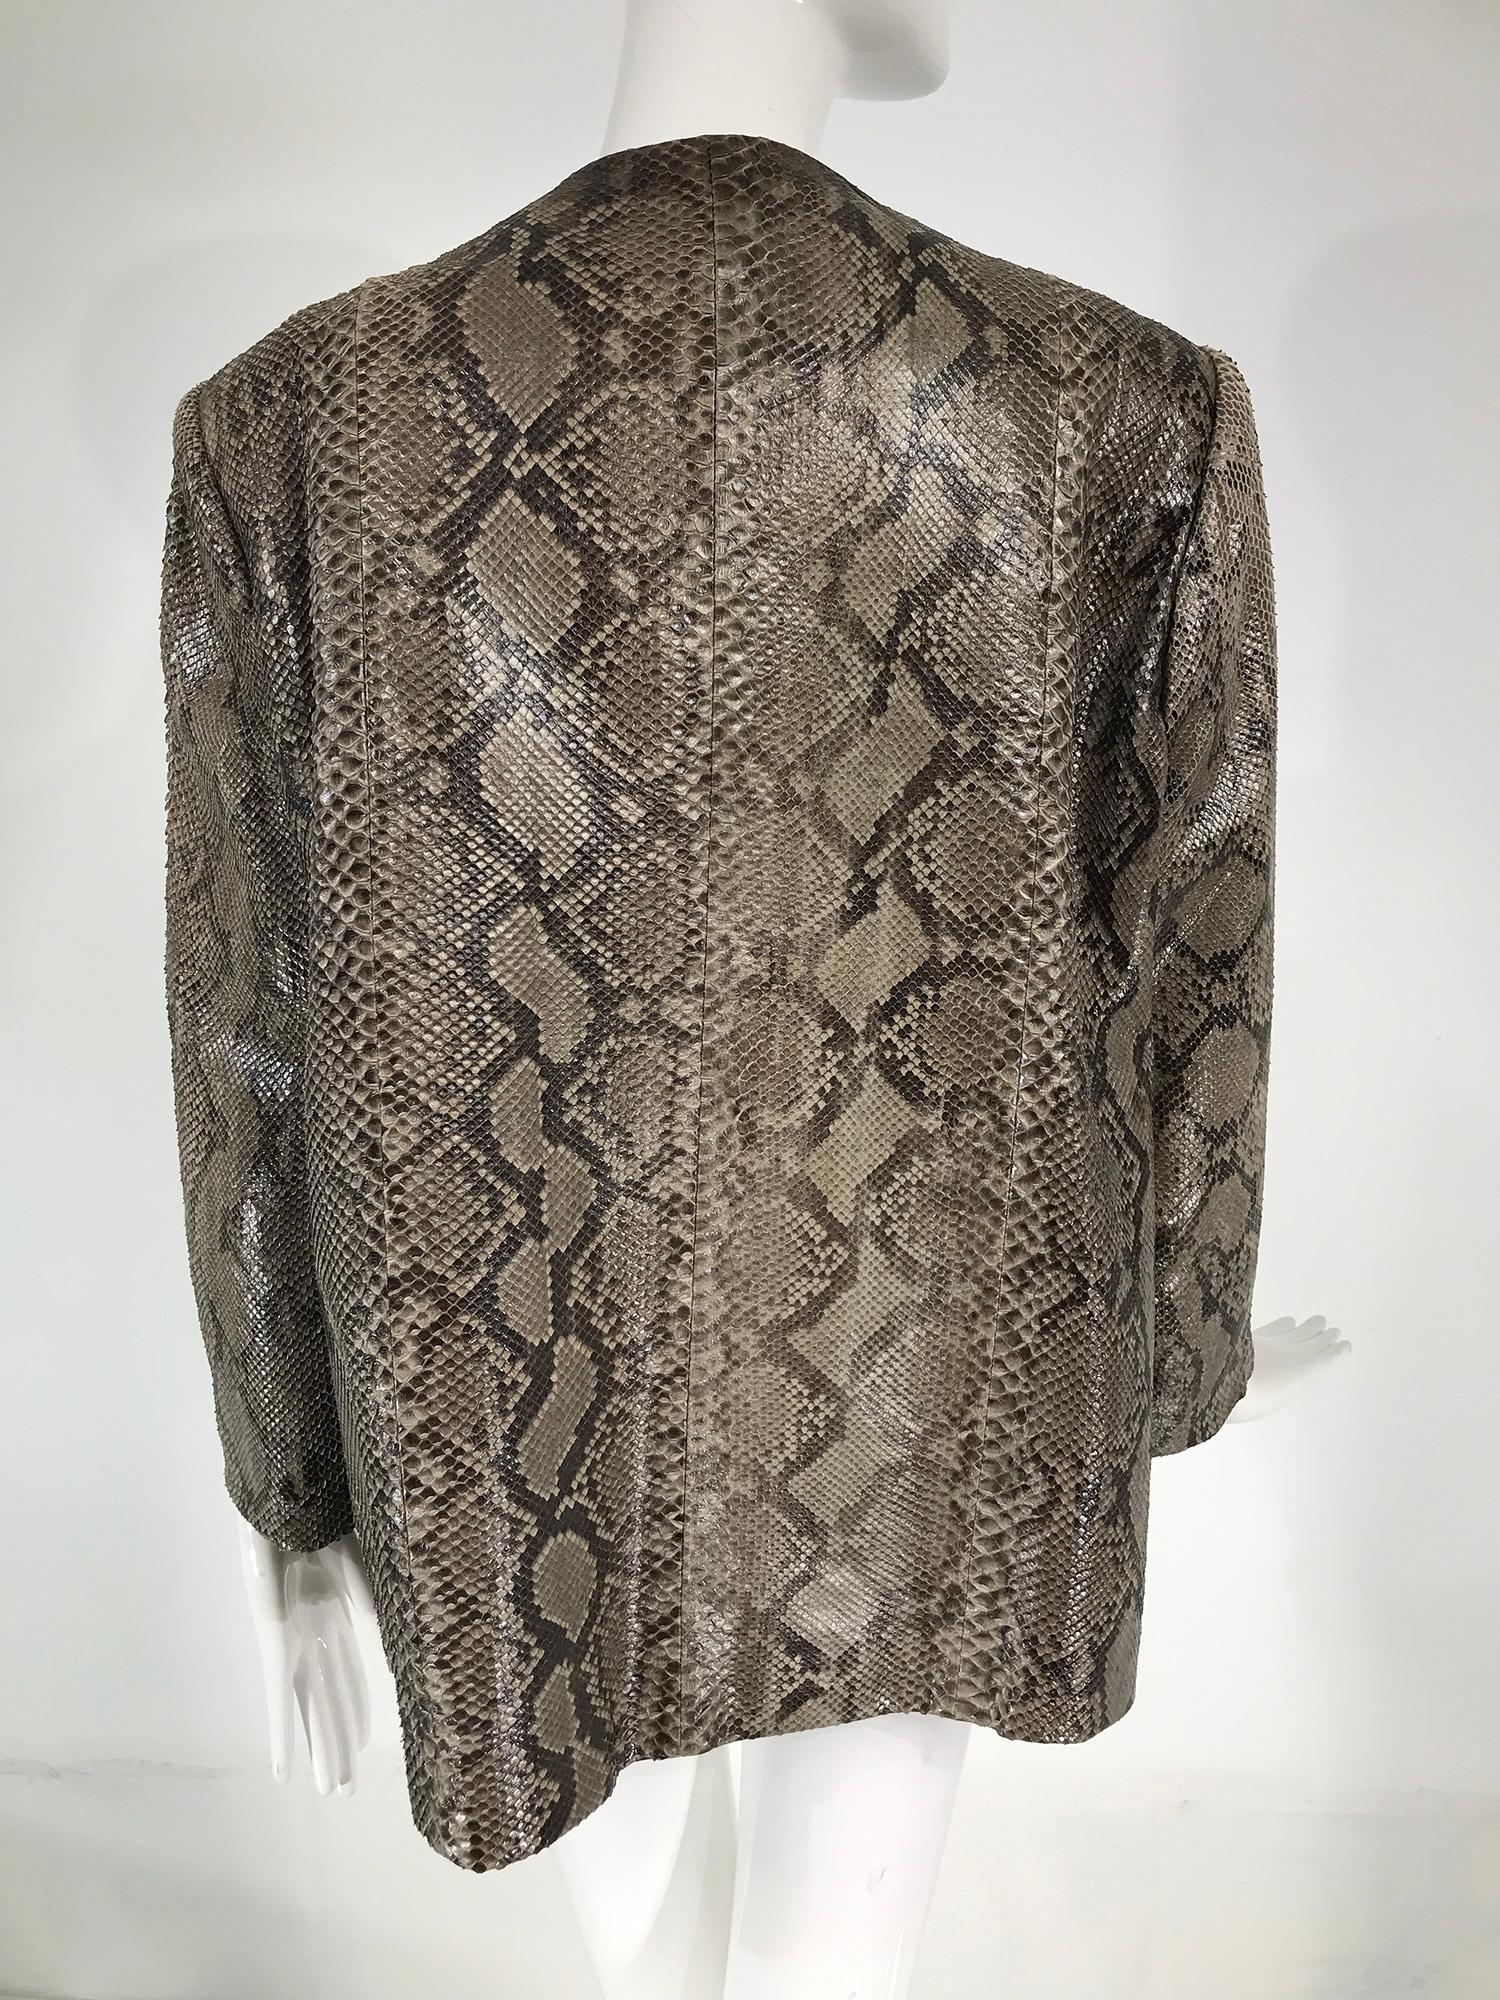 Vintage Bill Blass Boxy Snakeskin Button Front Jacket In Good Condition For Sale In West Palm Beach, FL